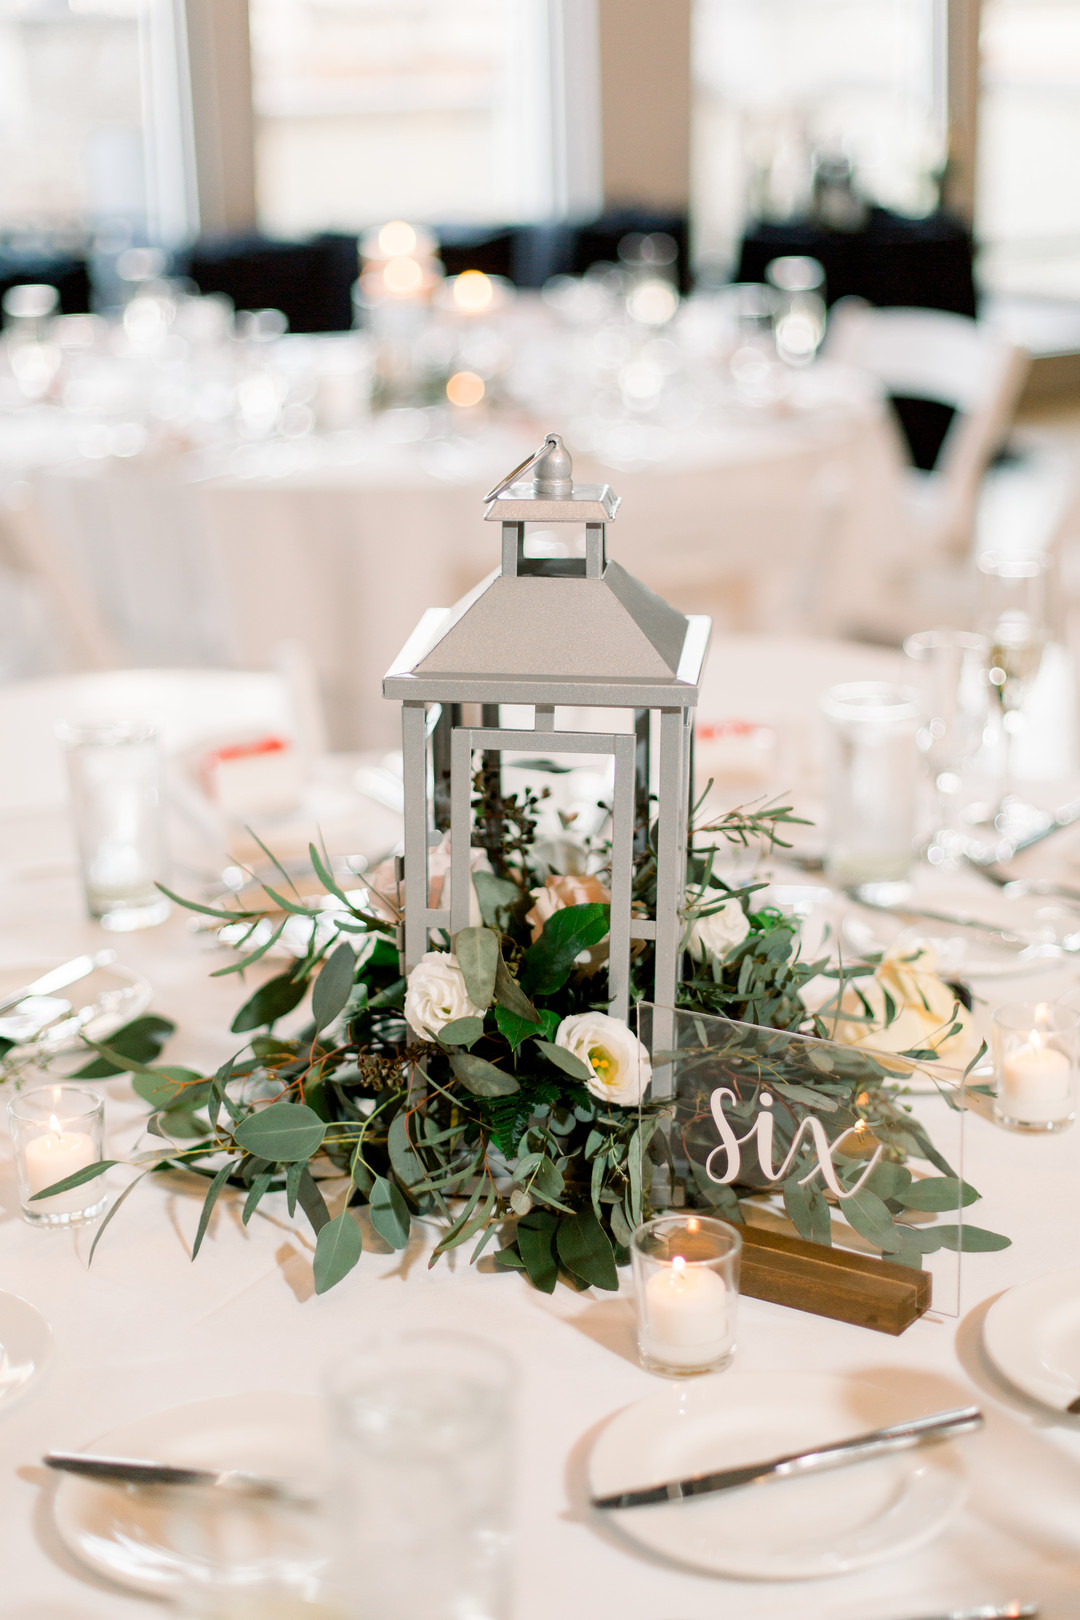 Lantern wedding centerpieces: Spring wedding inspiration captured by Nicole Morisco Photography. Find more spring wedding ideas at CHItheeWED.com!